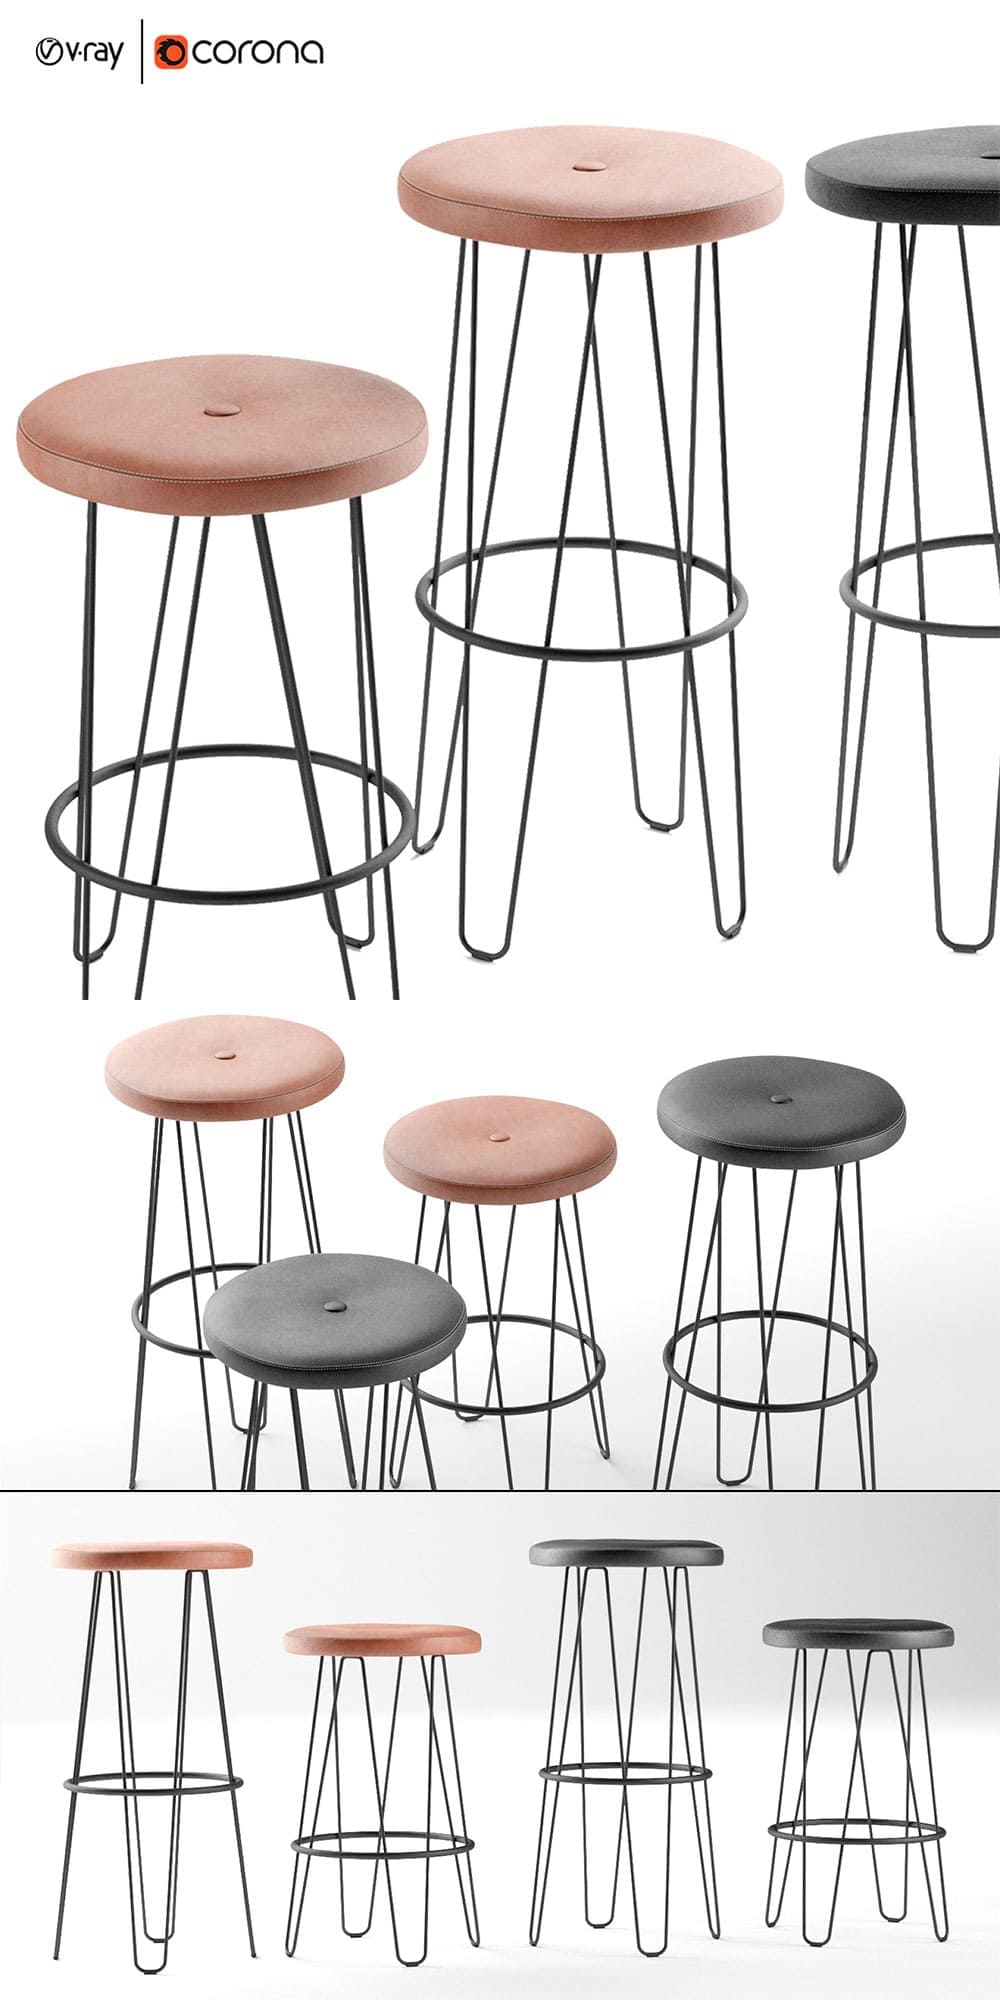 Circus steel barstool by gohlin, picture for pinterest.